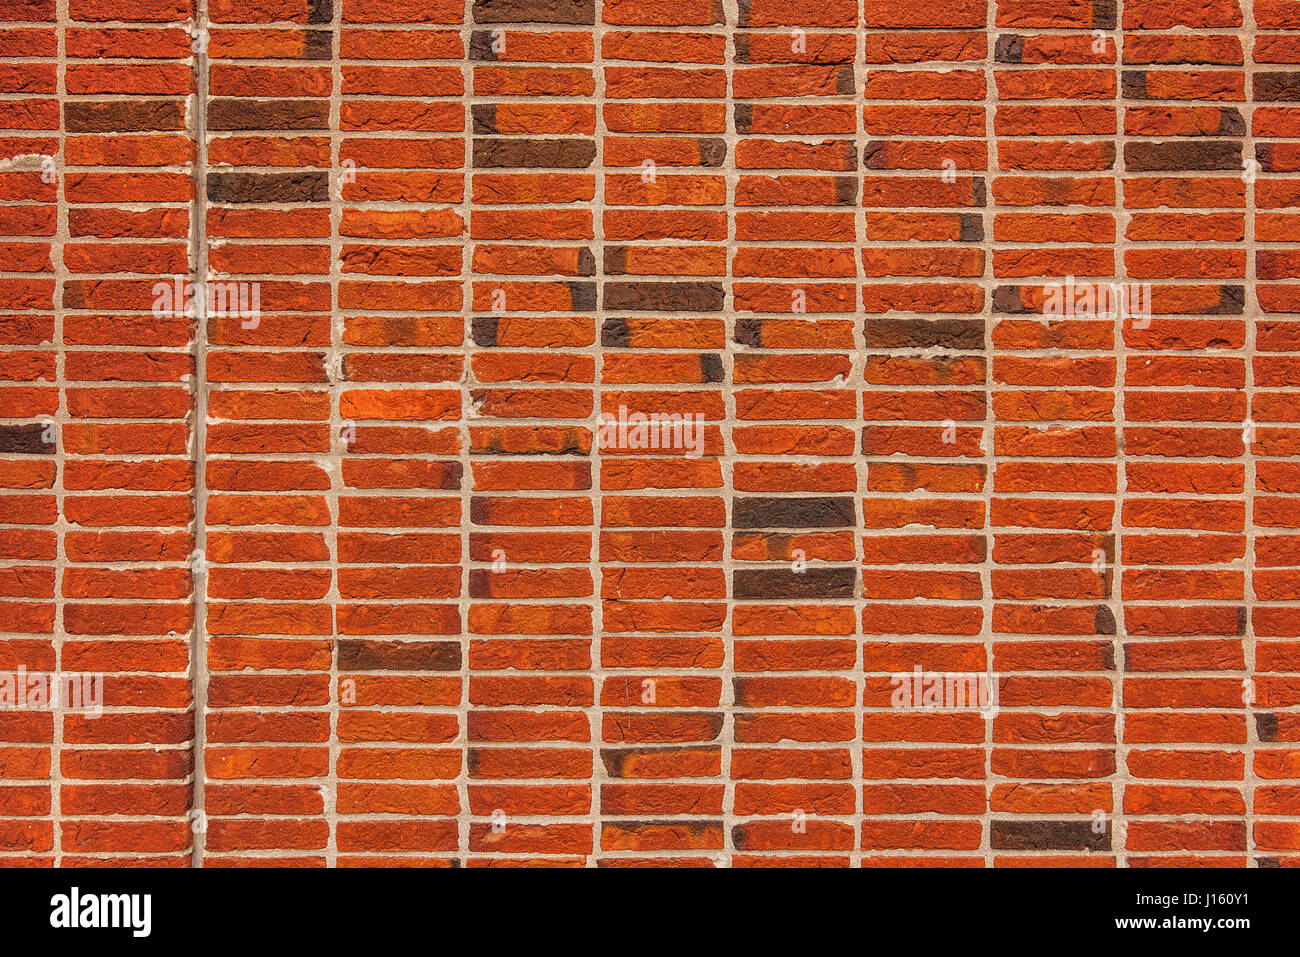 Unique brick wall texture, stacking method for bricklaying in building and construction industry Stock Photo